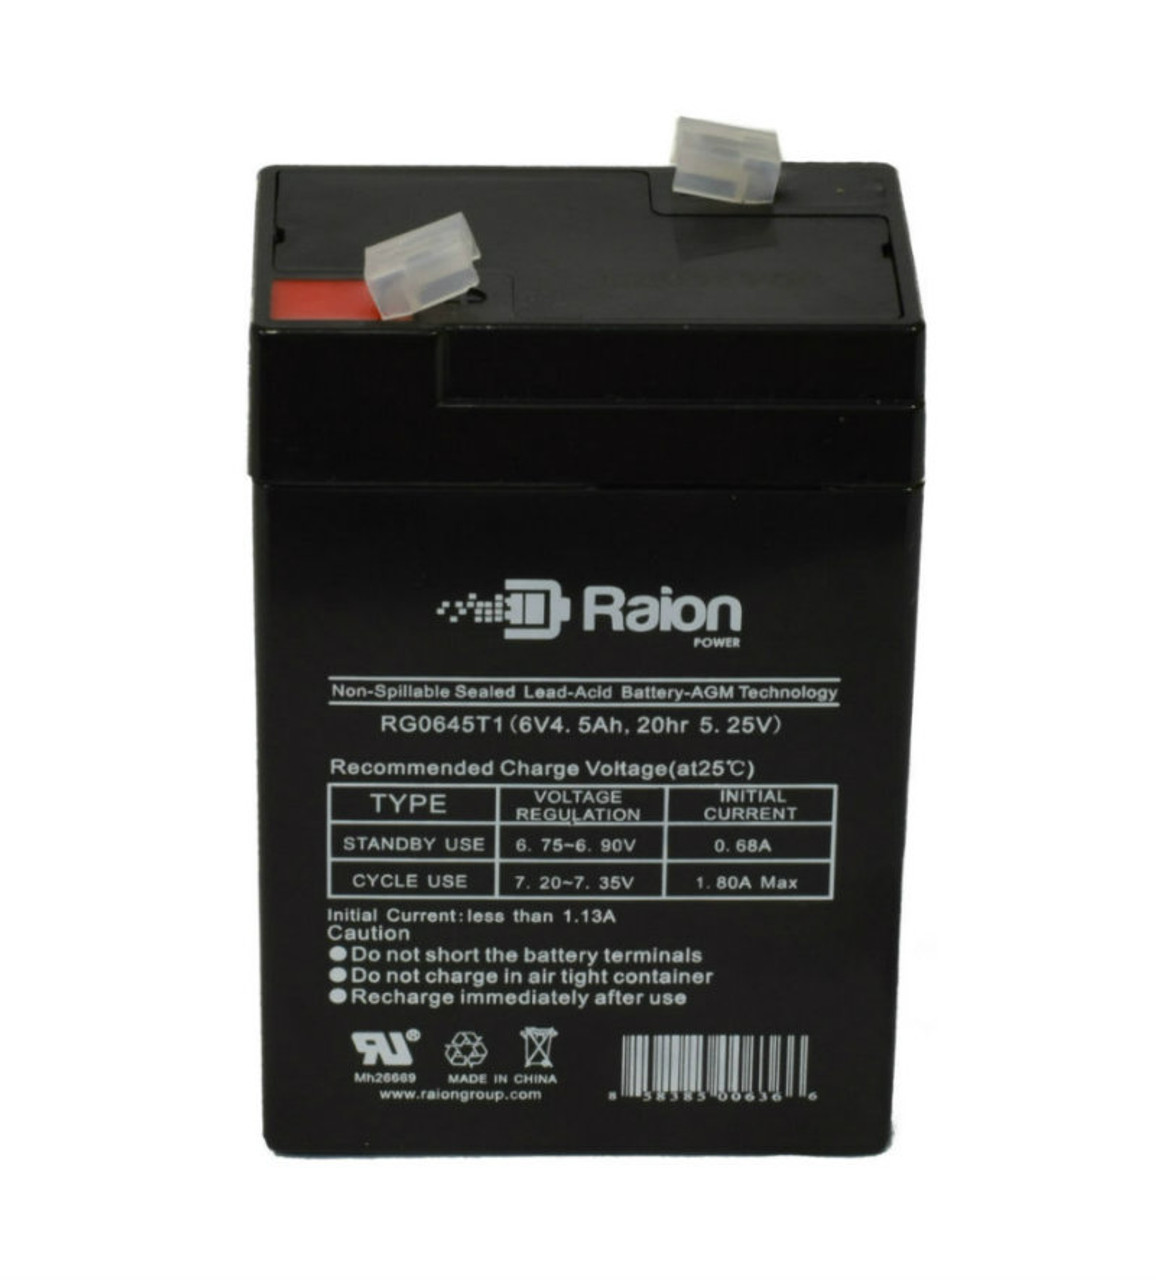 Raion Power RG0645T1 Replacement Battery Cartridge for Himalaya 3FM4.5